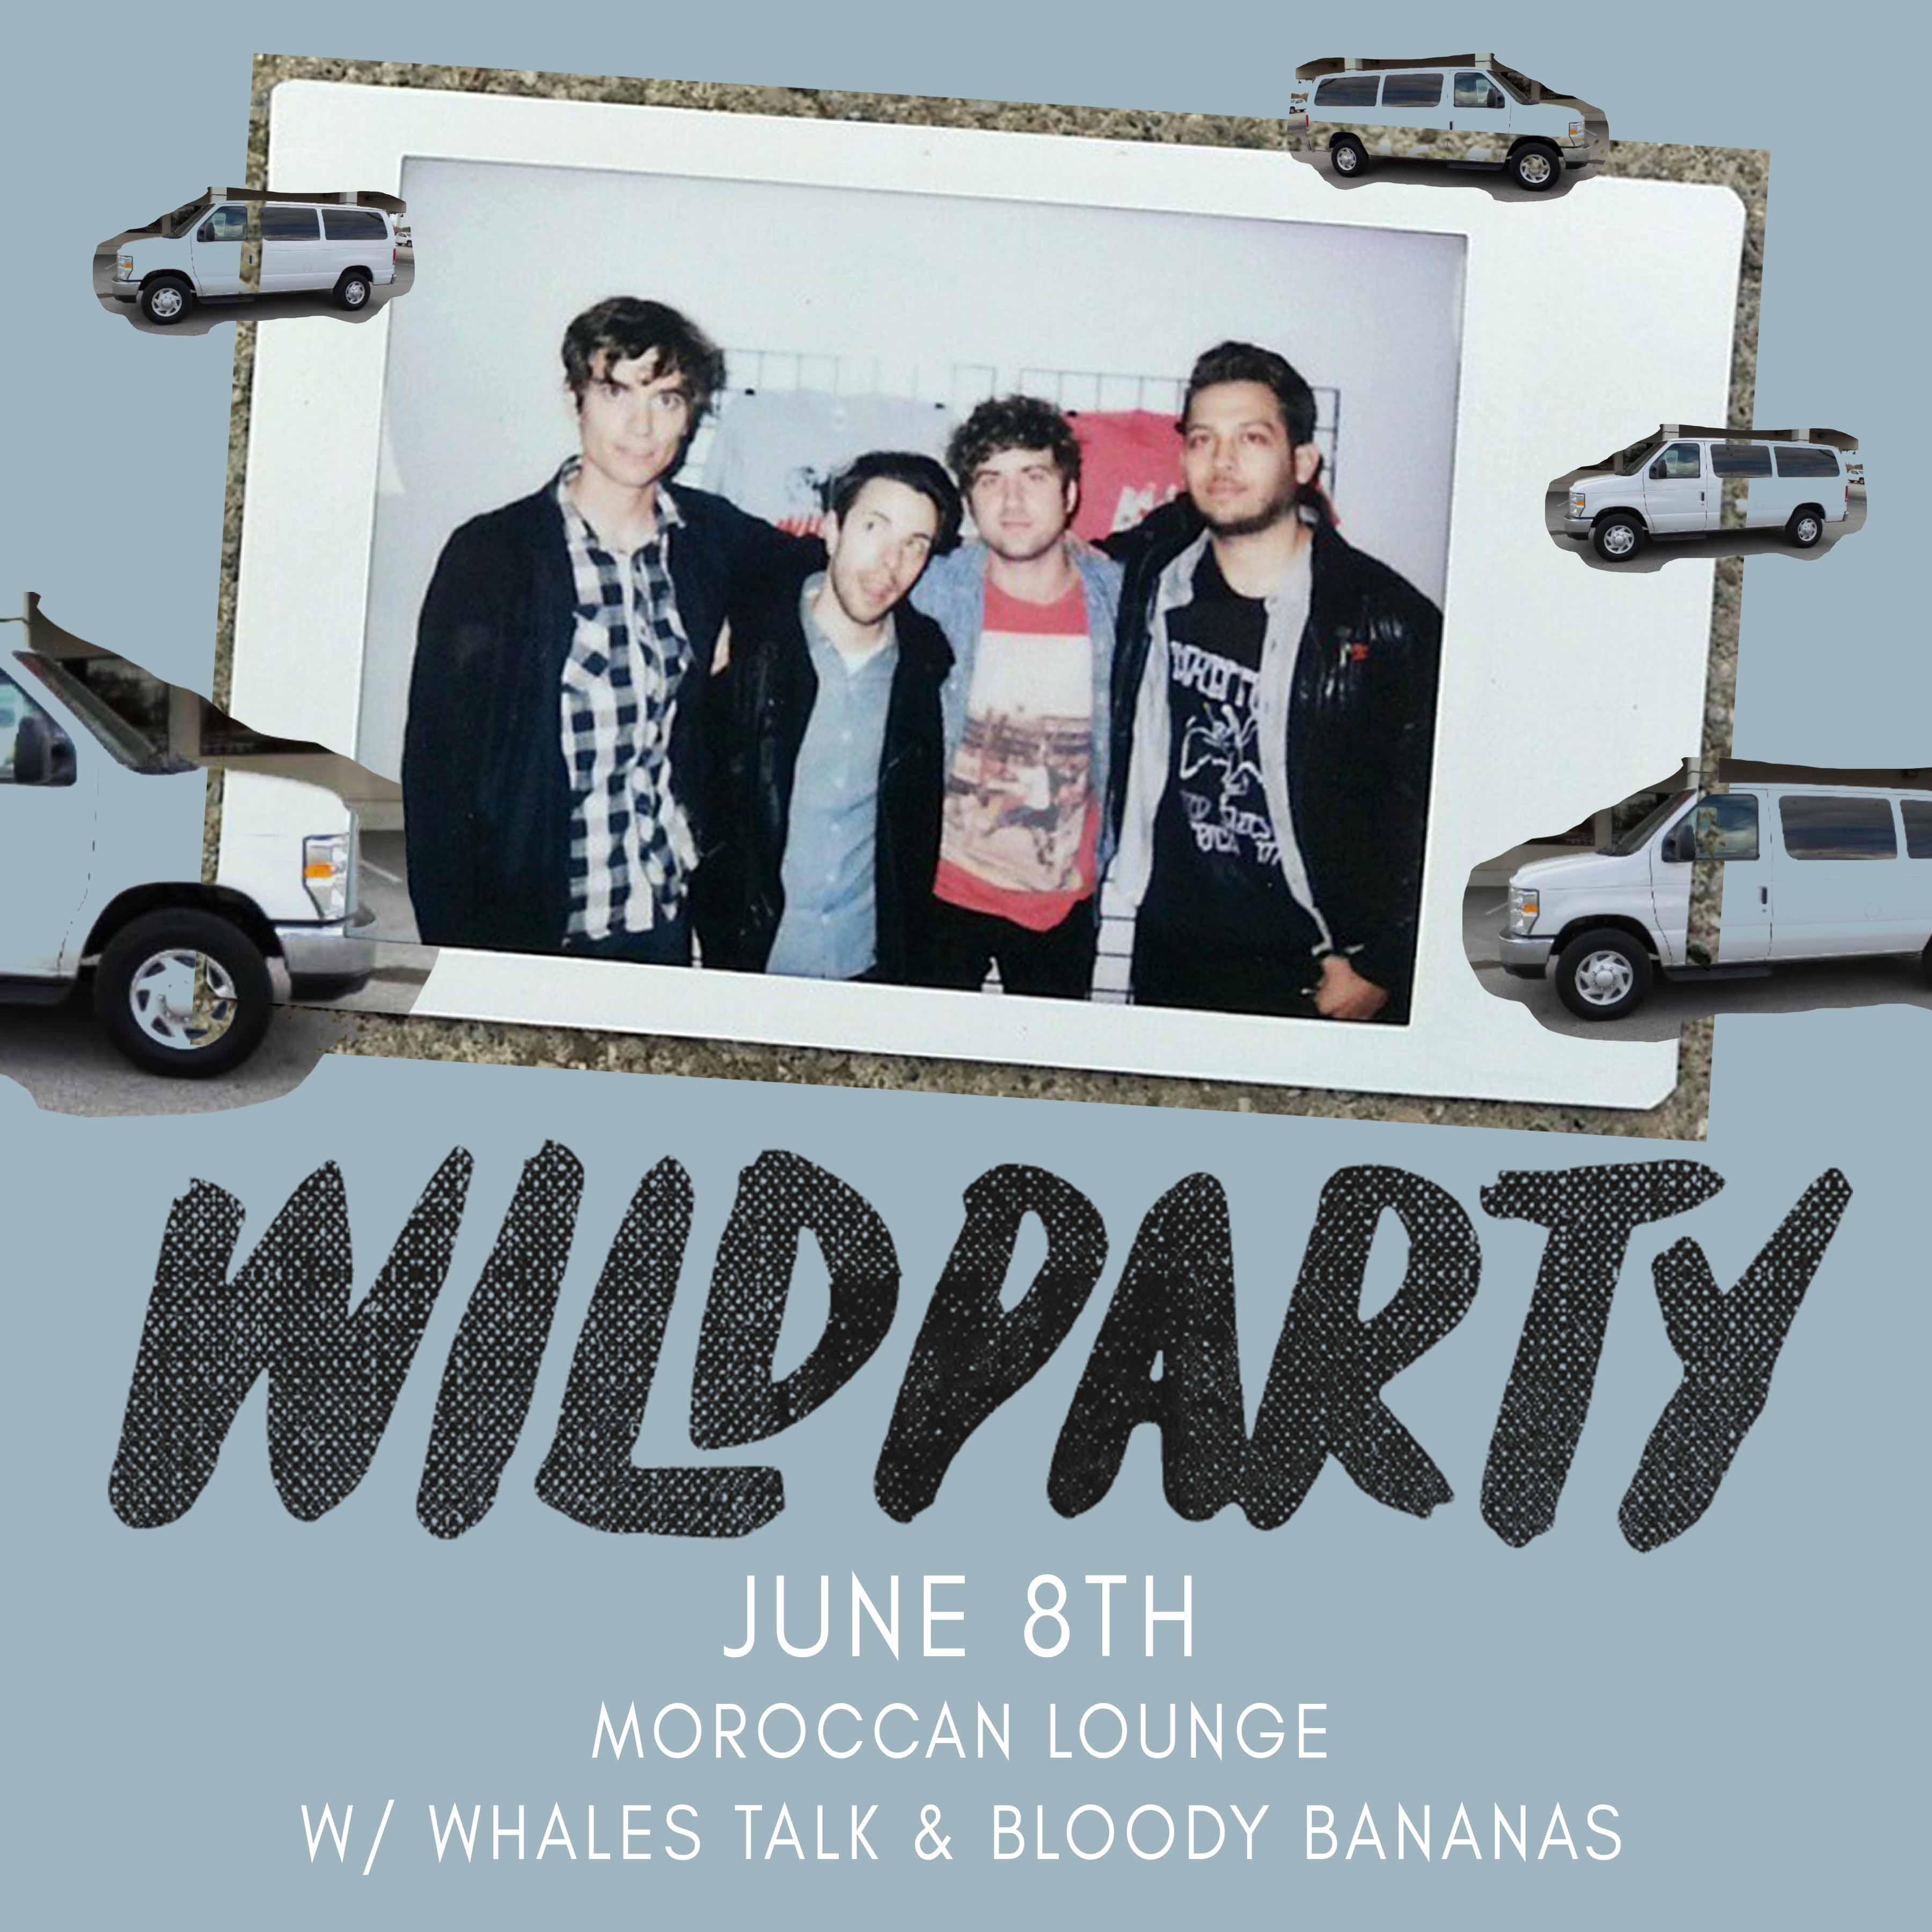 Wild Party - Band at Moroccan Lounge